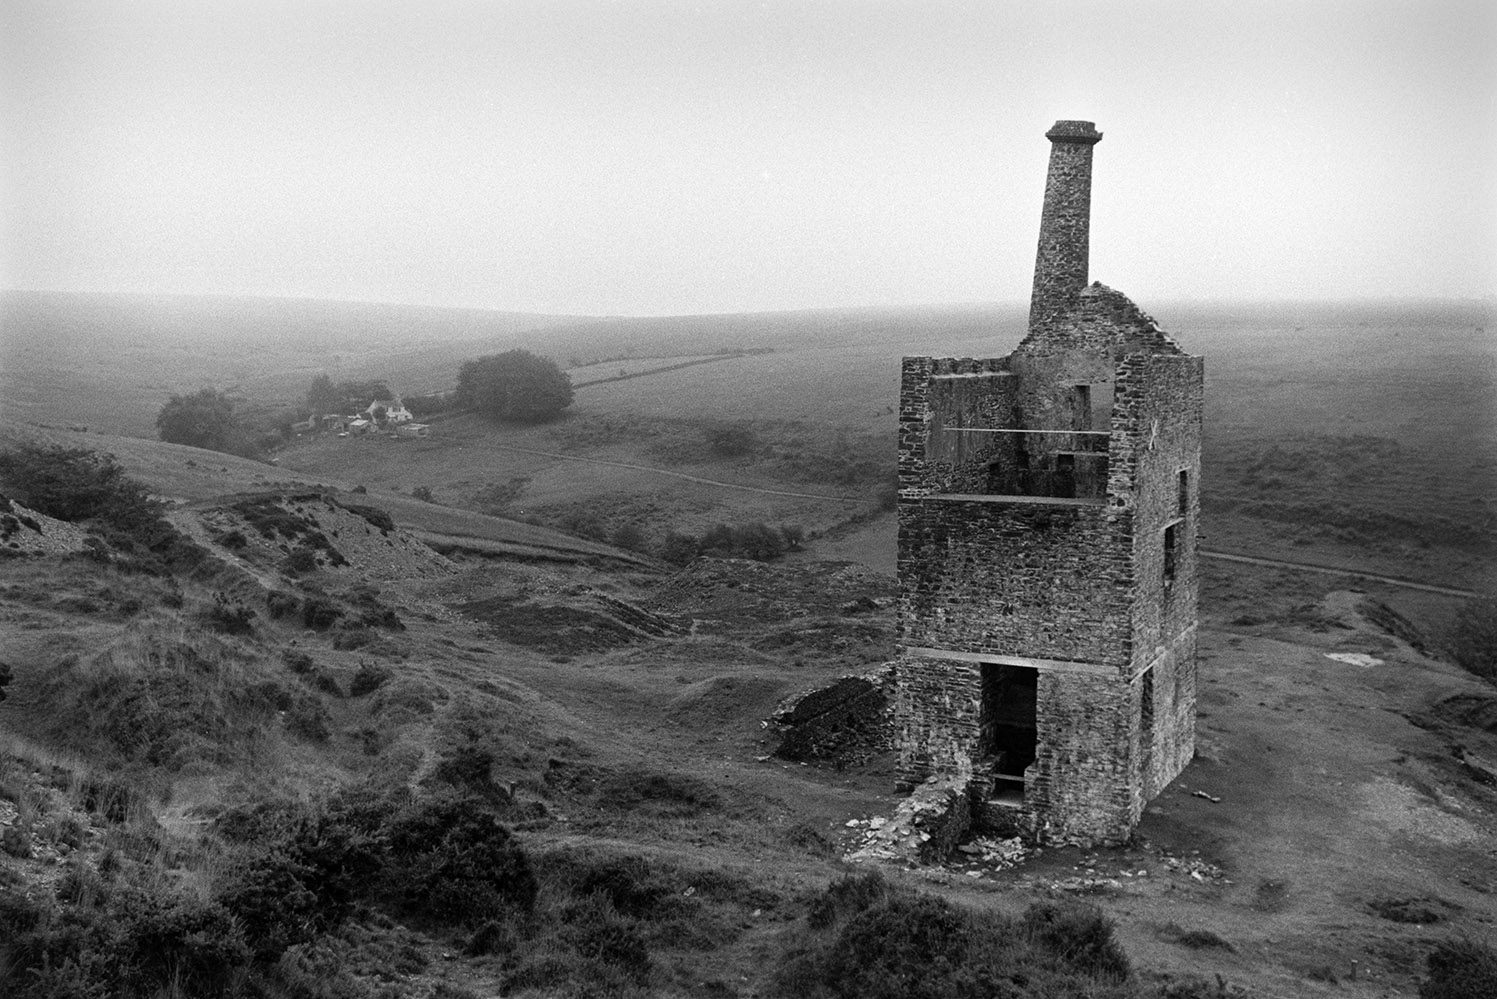 A silver-lead mine with a ruined mining building, at Mary Tavy, Tavistock.